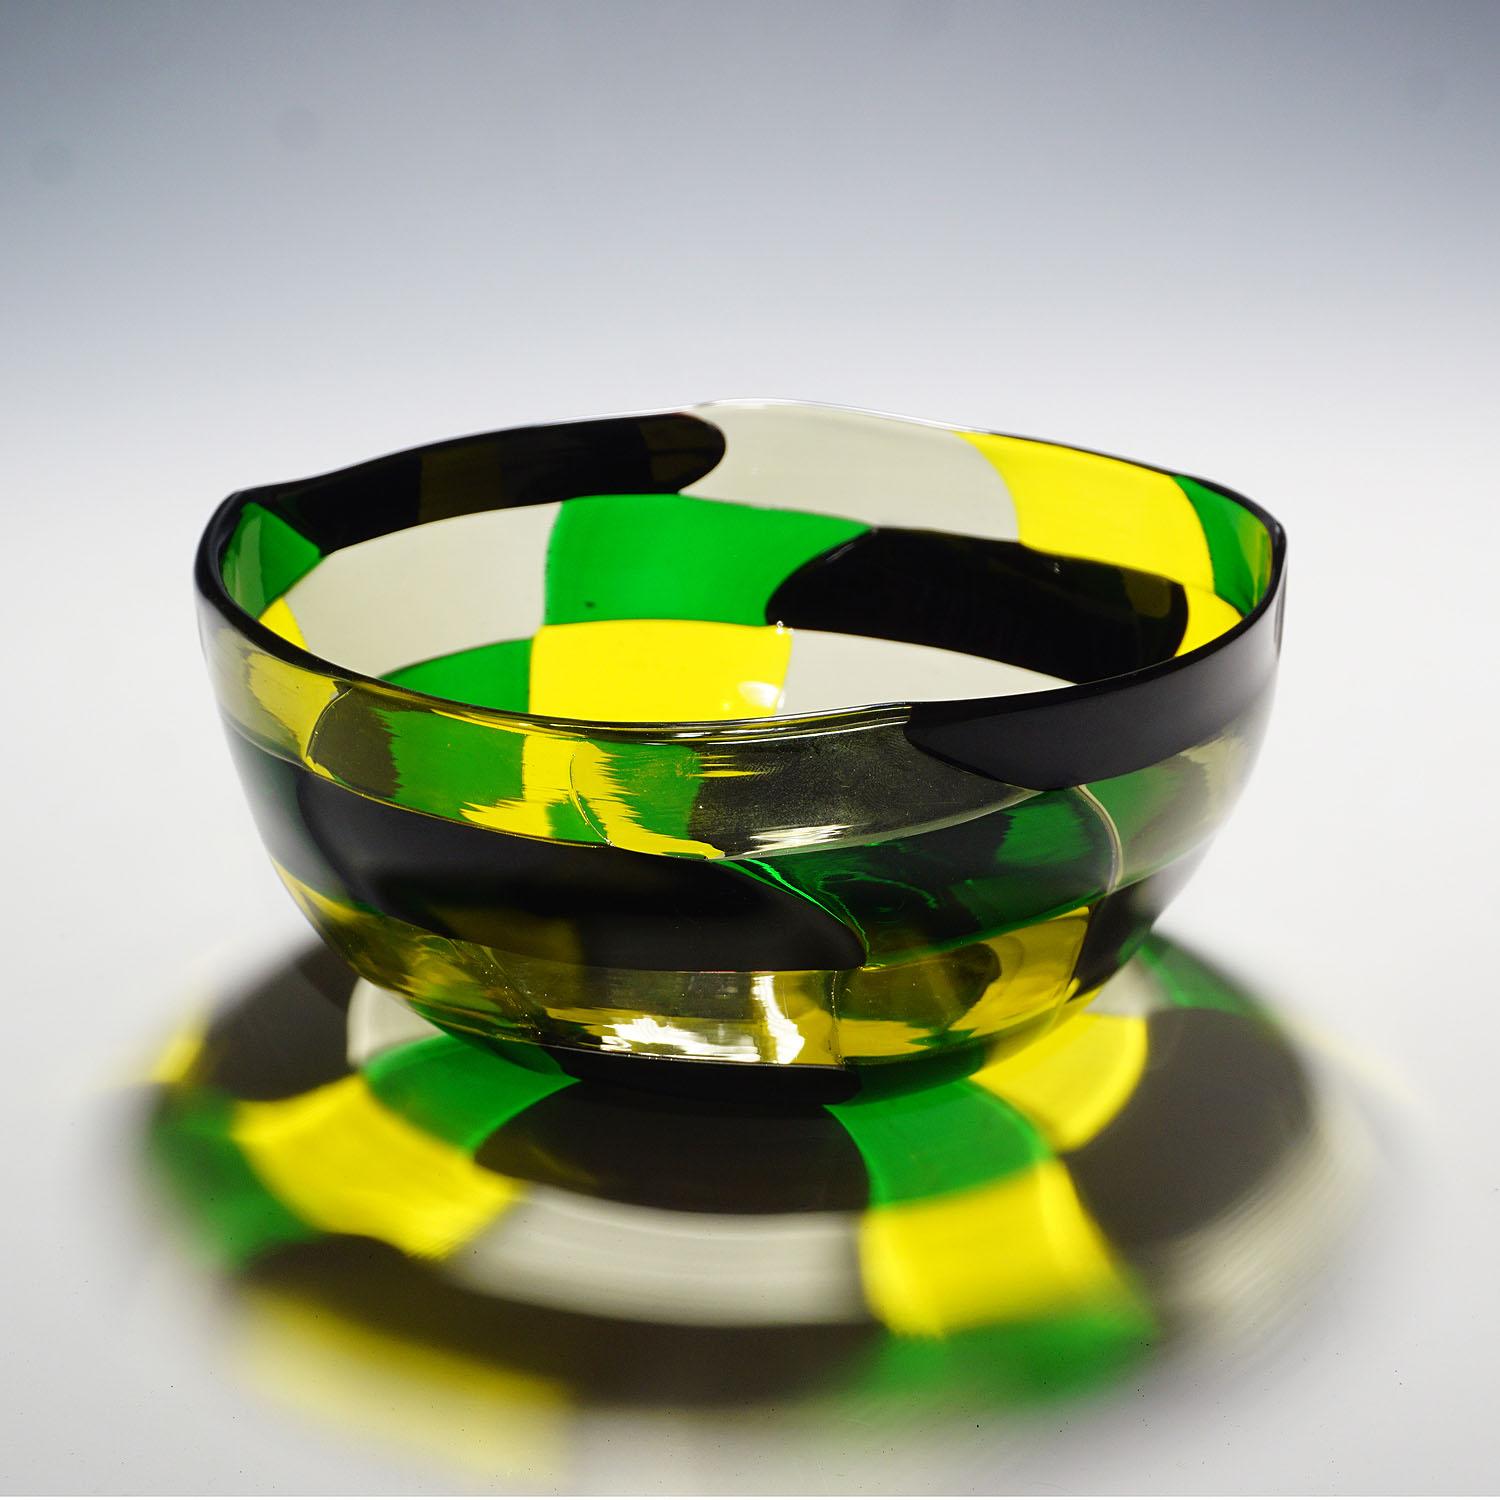 A Pezzato Americano bowl in yellow, green, straw and black colored glass designed by Fulvio Bianconi in 1950. Manufactured by Venini, Venice ca. 1950s. With acid etched signature 